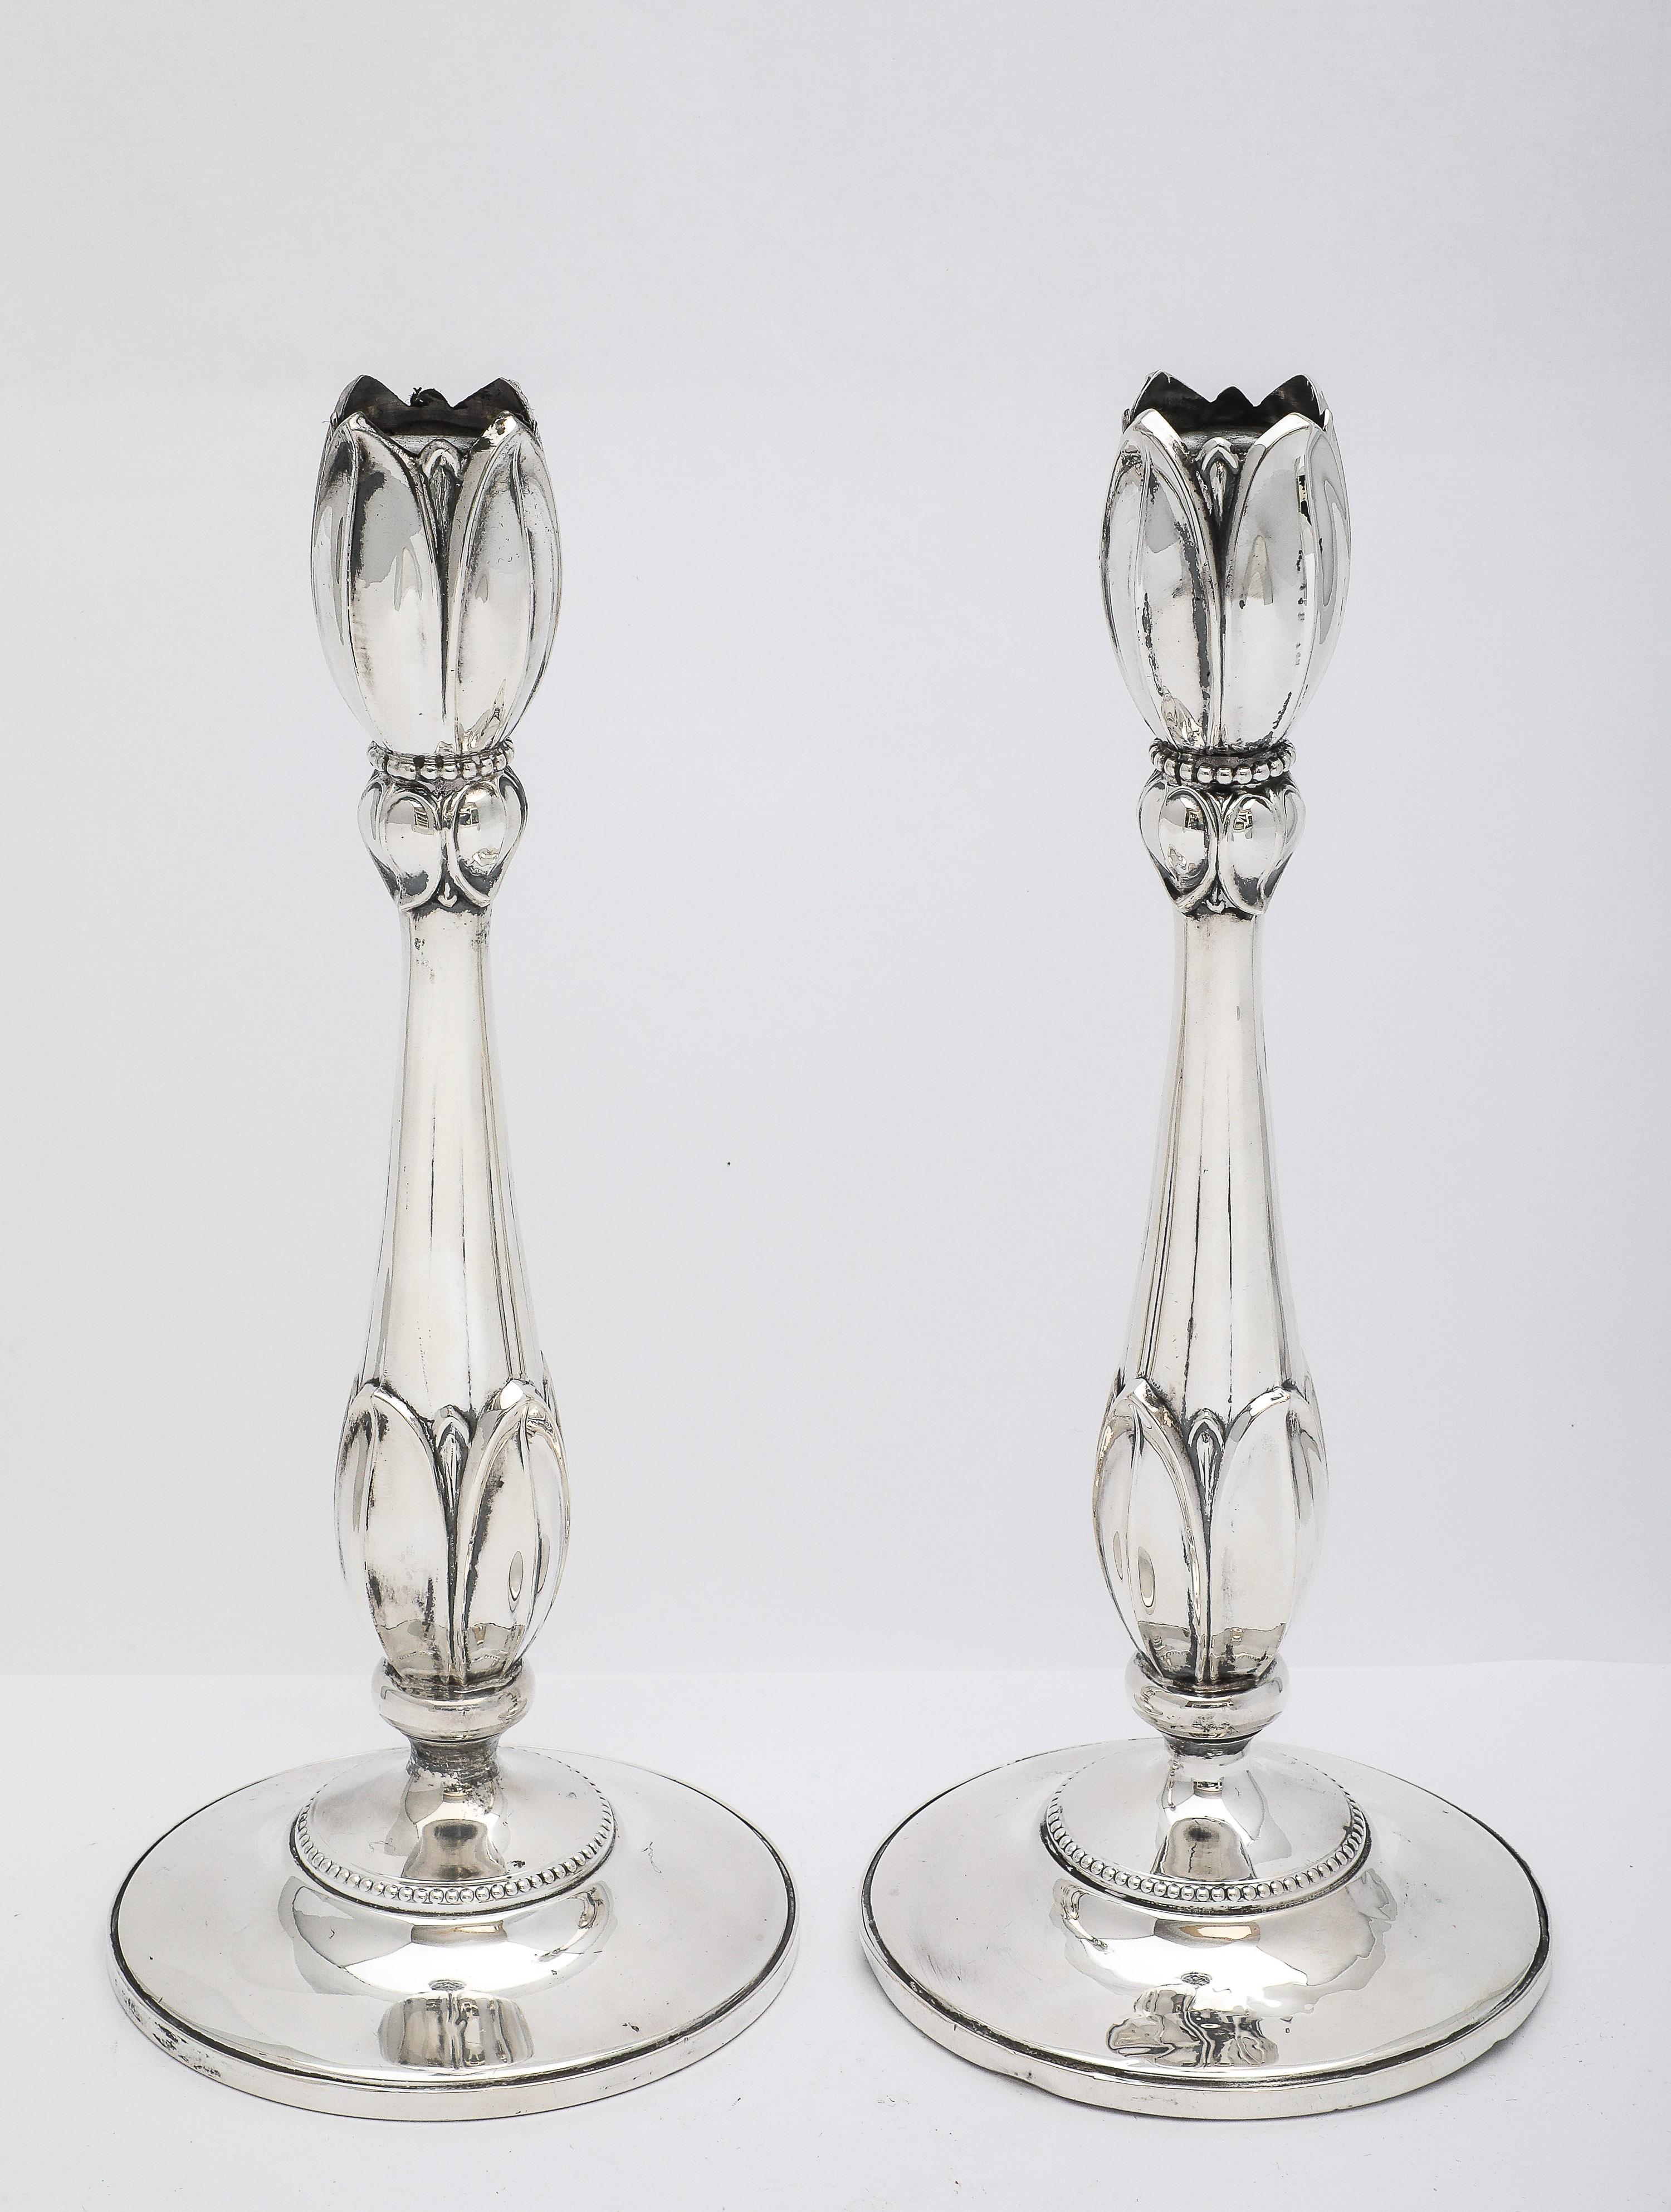 Rare Pair of Tall Sterling Silver Art Nouveau-Style Flower-Form Candlesticks For Sale 2